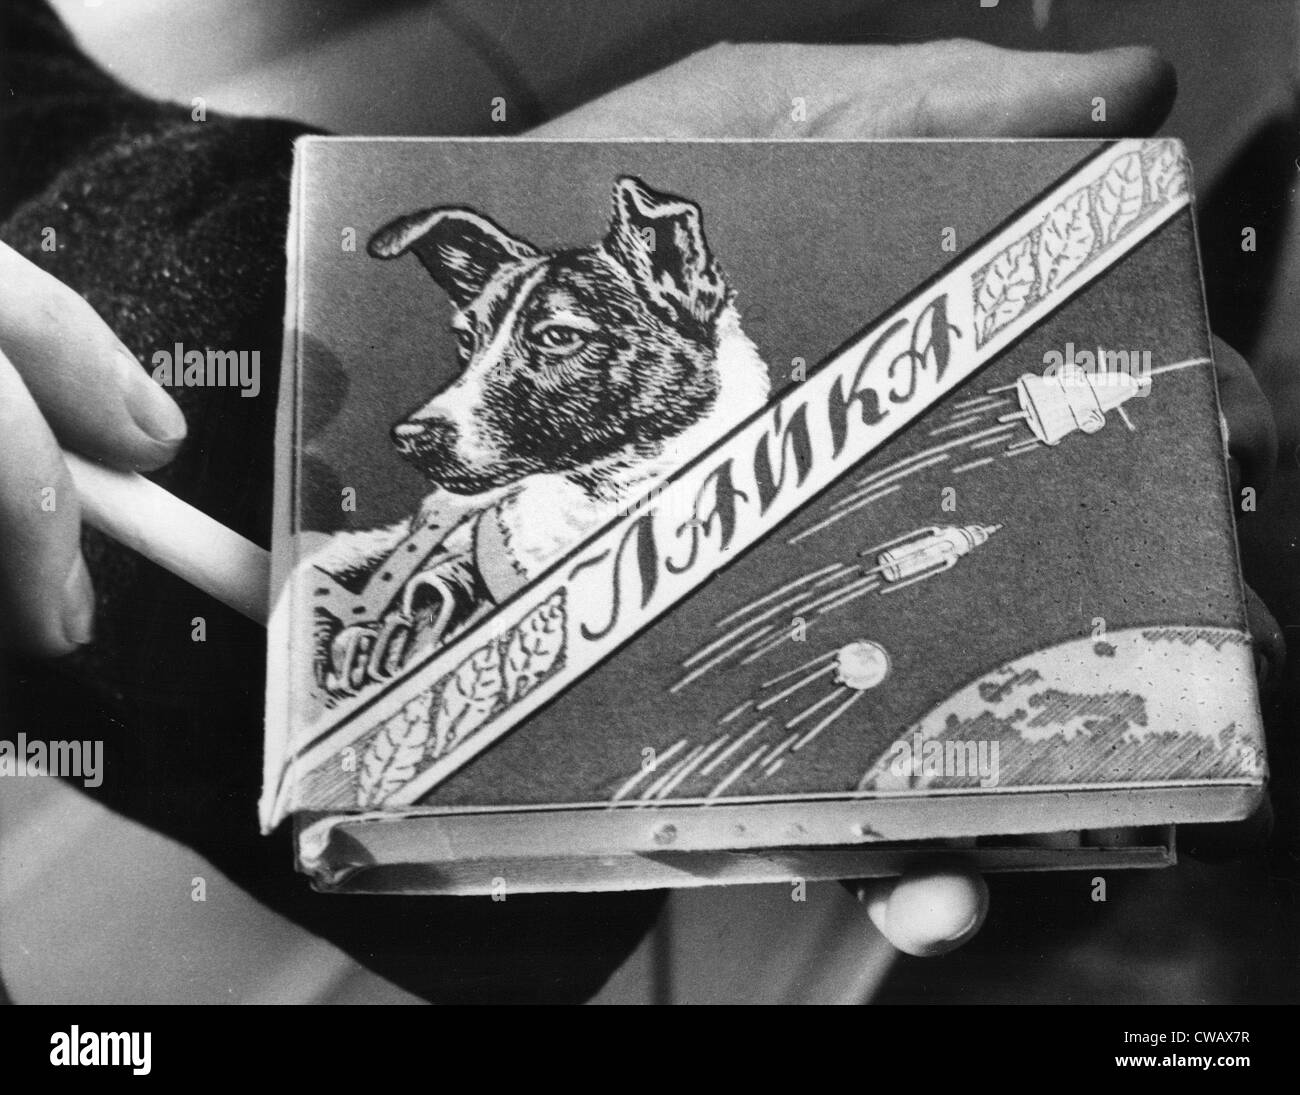 Laika the Russian space dog, first creature to orbit the earth has a brand of cigarettes named for him, 1960. Courtesy: CSU Stock Photo